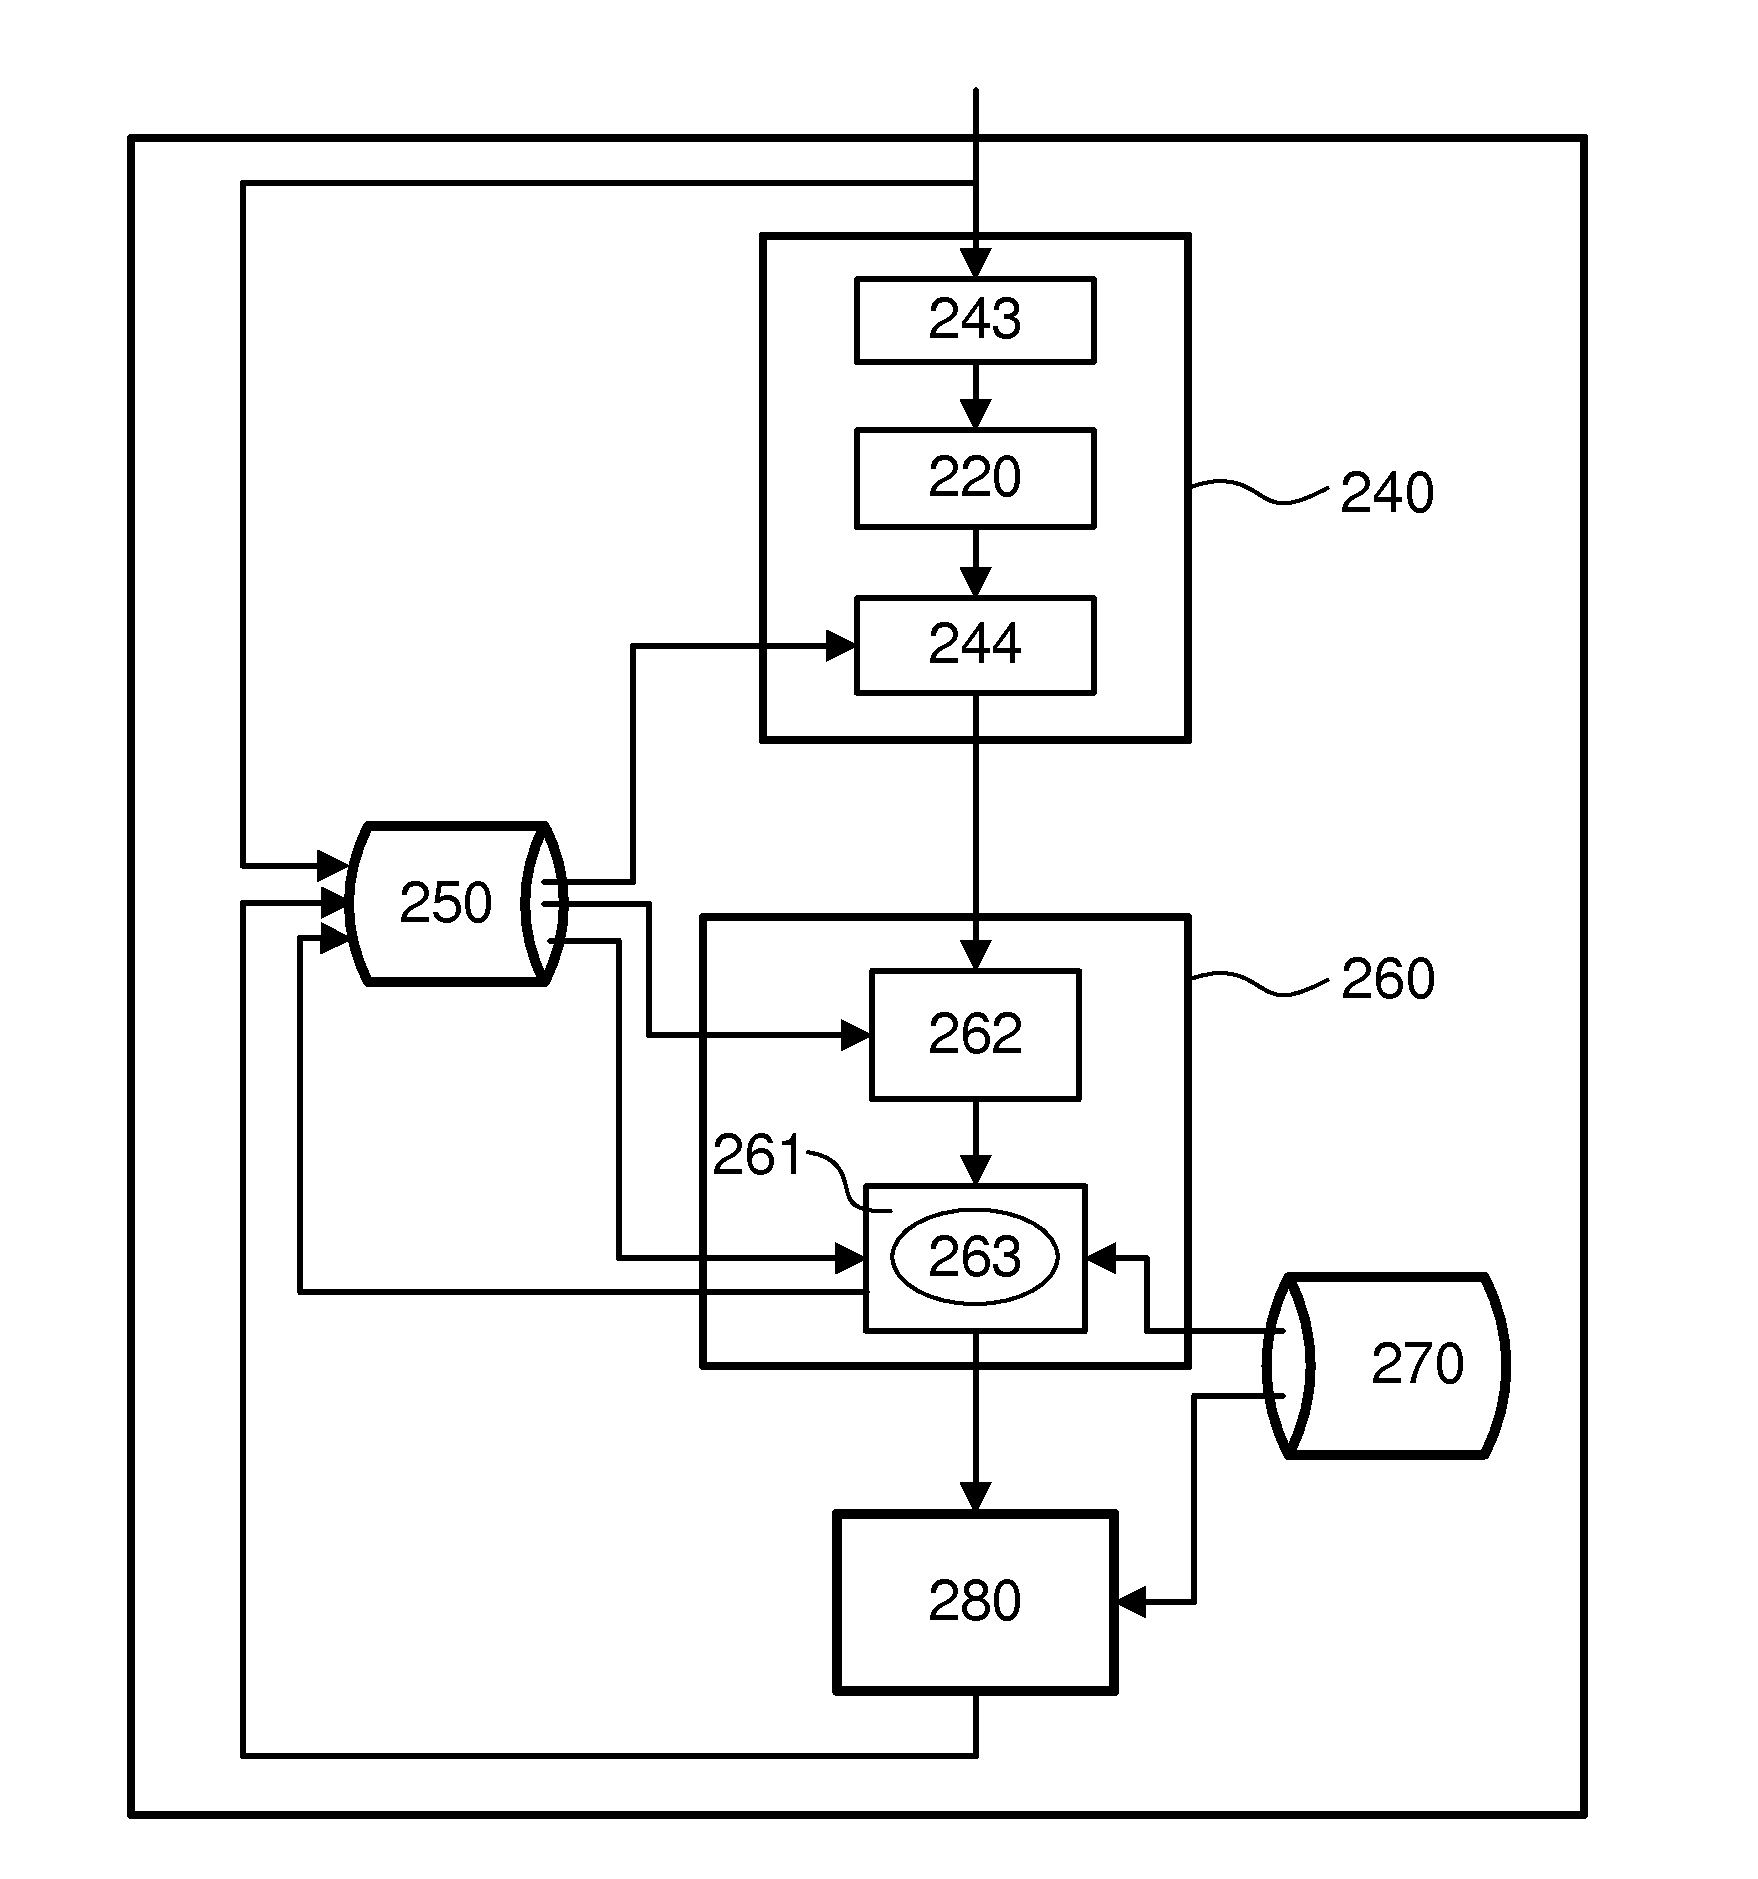 System and method for assisting in making a treatment plan